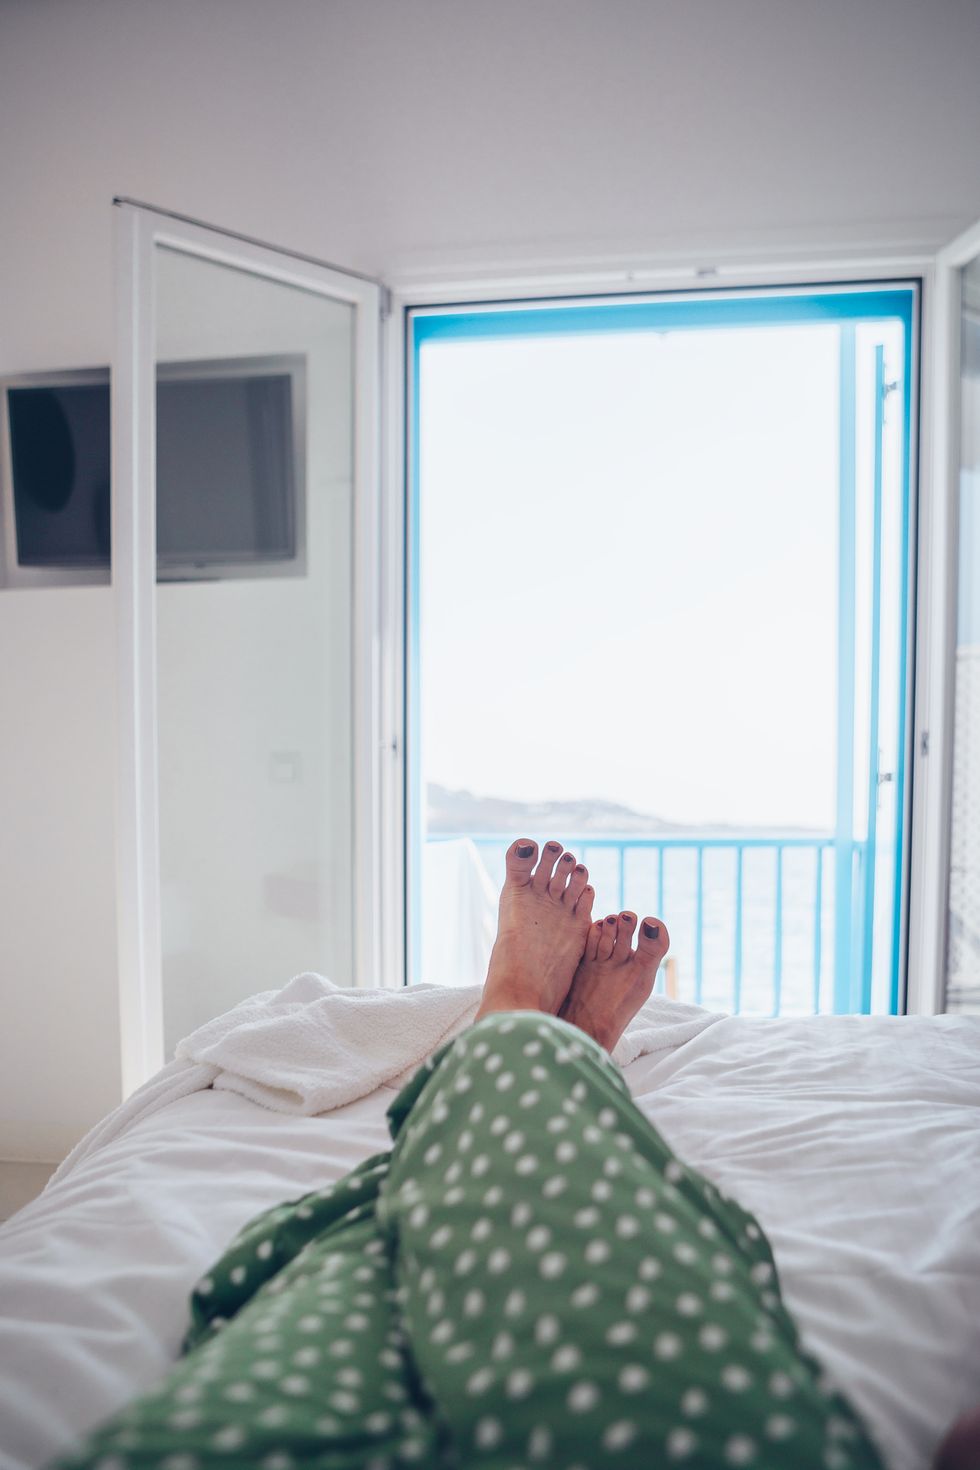 13 ways to stay cool at night that actually work in hot weather